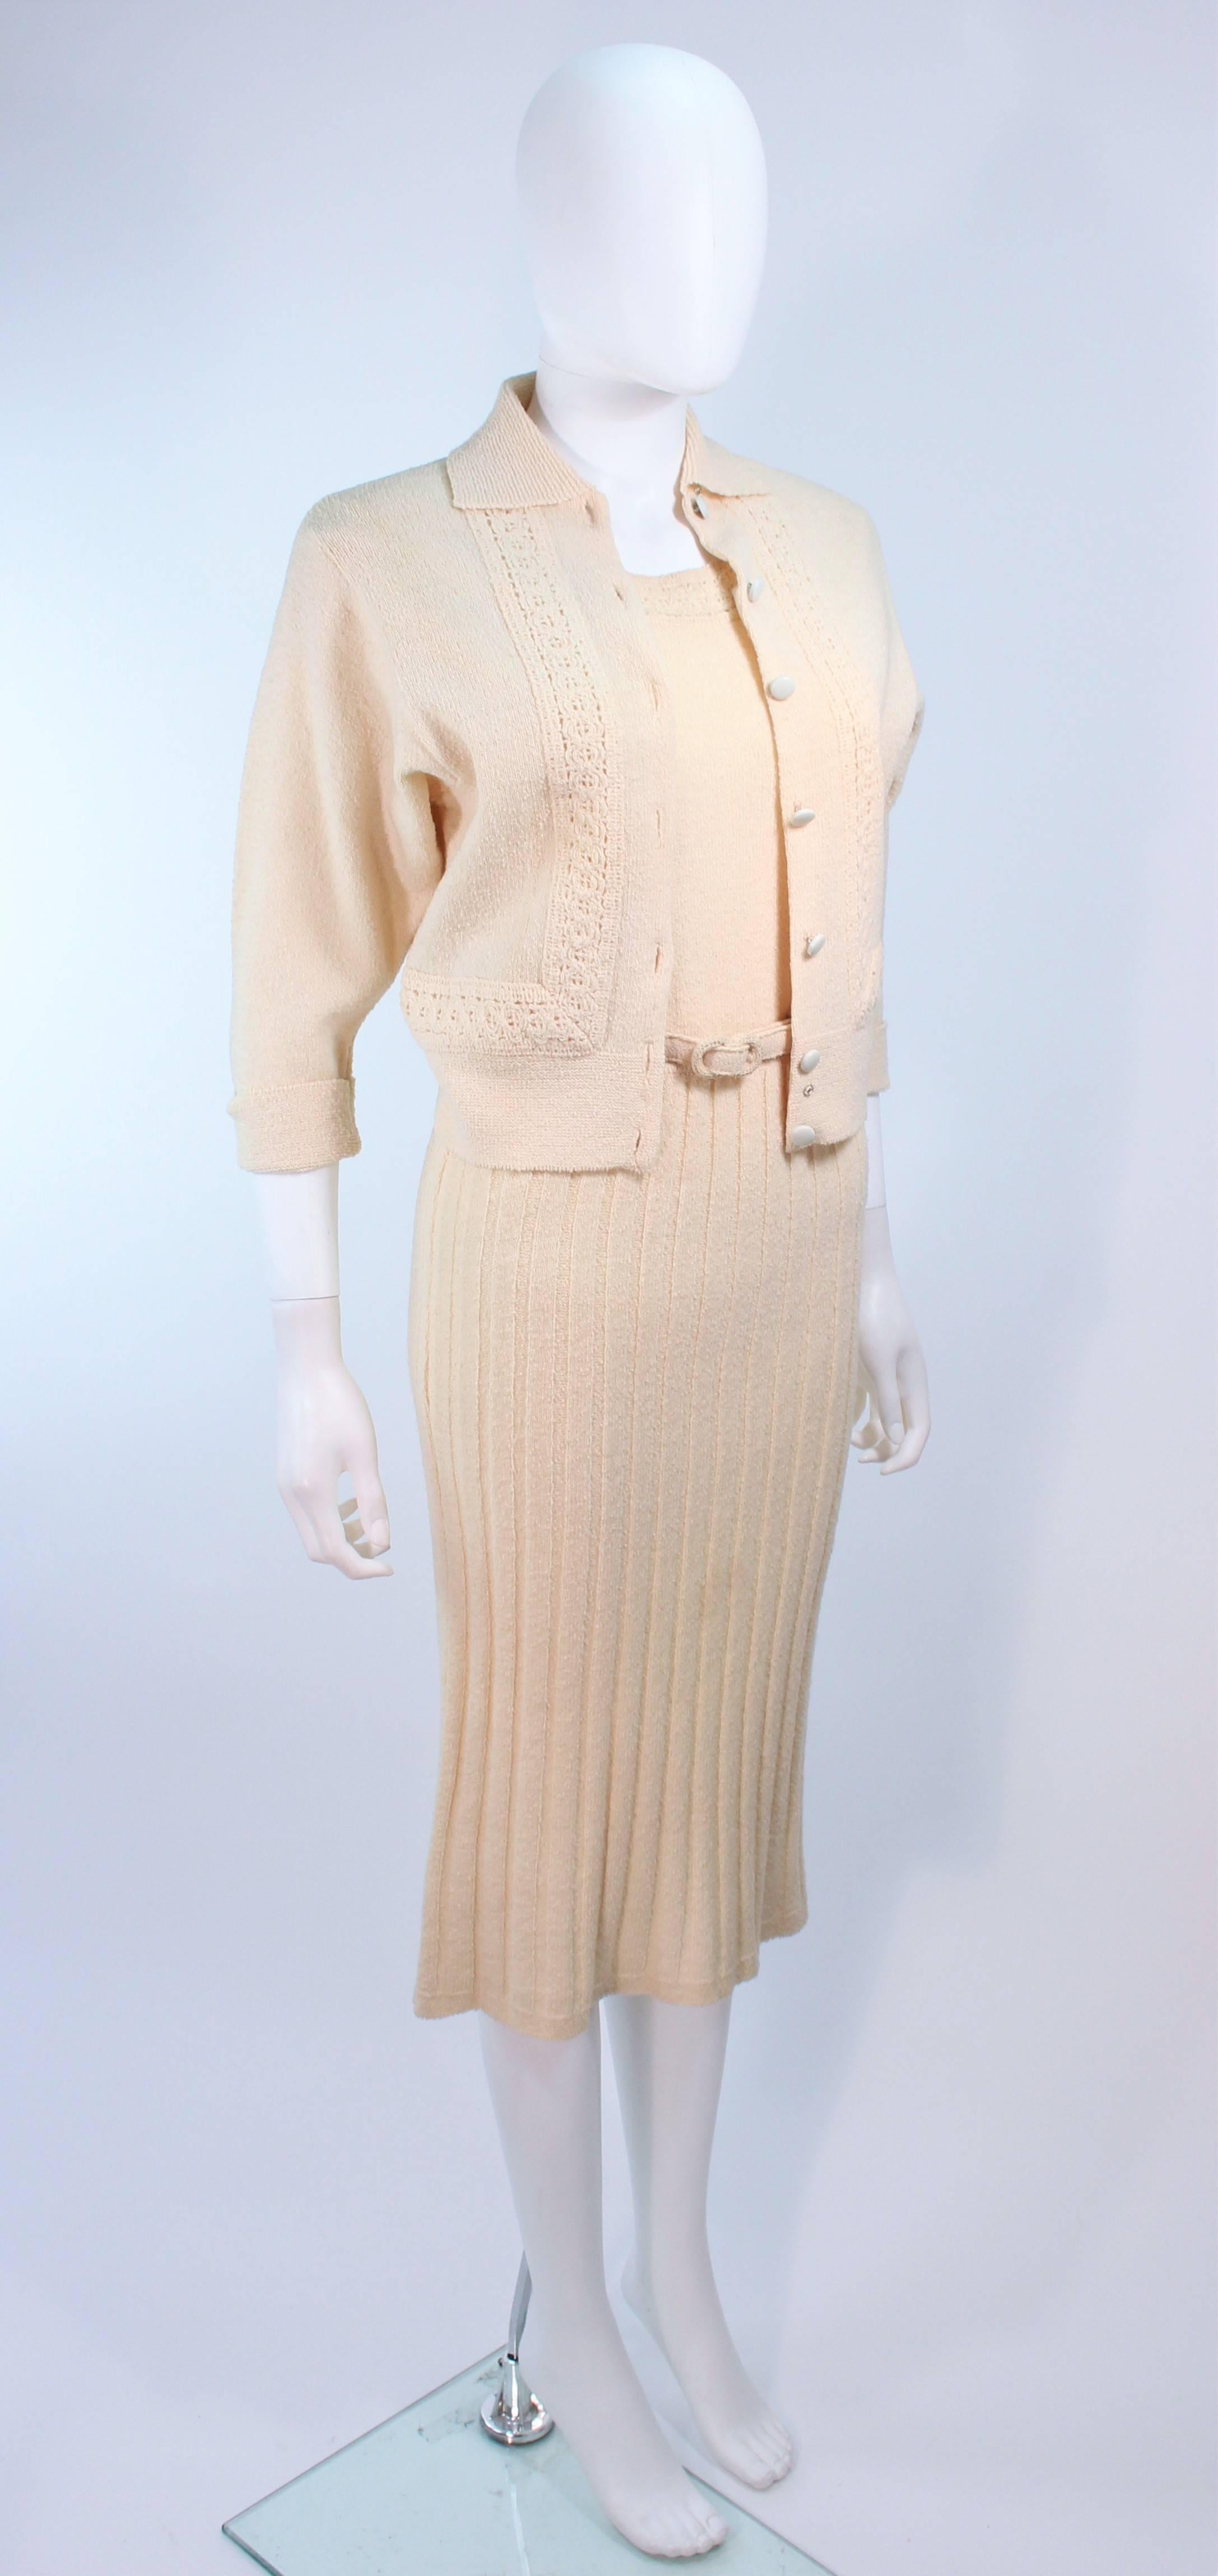 Women's Ivory 1950's Zephyr Chenille Wool Stretch Knit Dress and Sweater Ensemble Size 4 For Sale